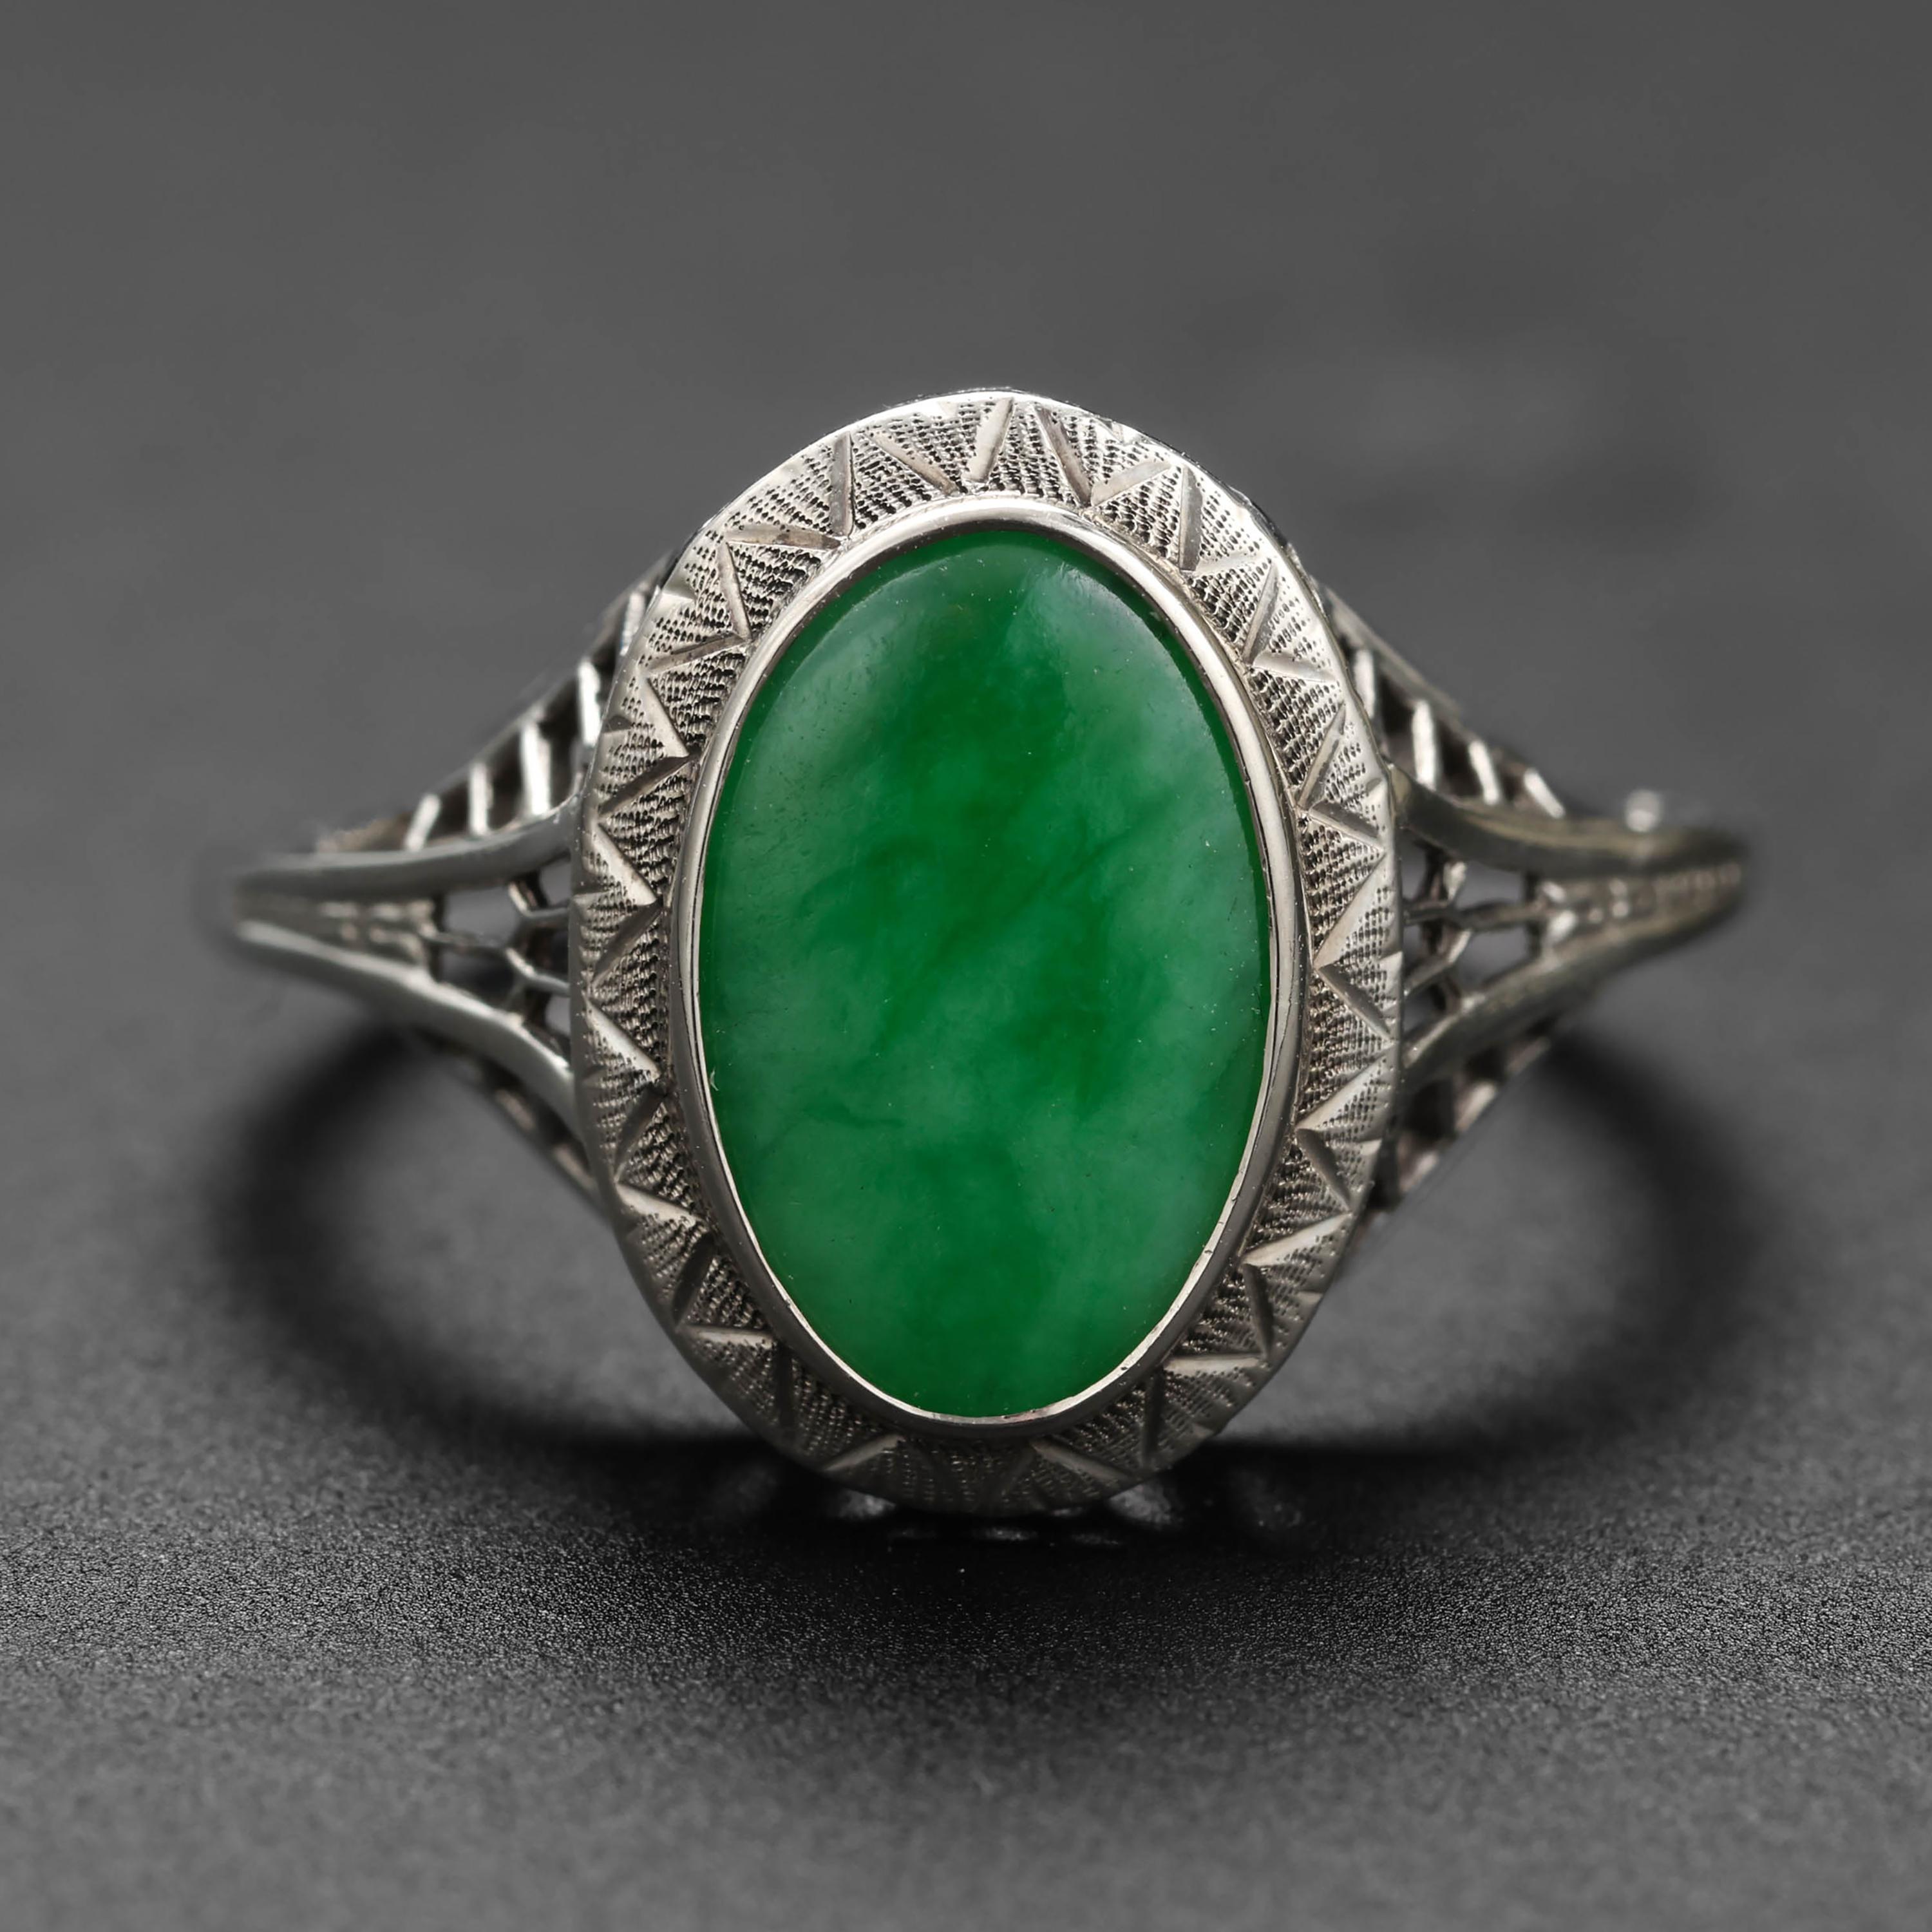 A luscious, translucent mottled emerald-green jadeite jade double cabochon is set within a highly detailed 18K white gold mounting in this Edwardian-era (circa 1905) ring. 

The jade stone measures 11mm x 7mm and has excellent translucency, as you